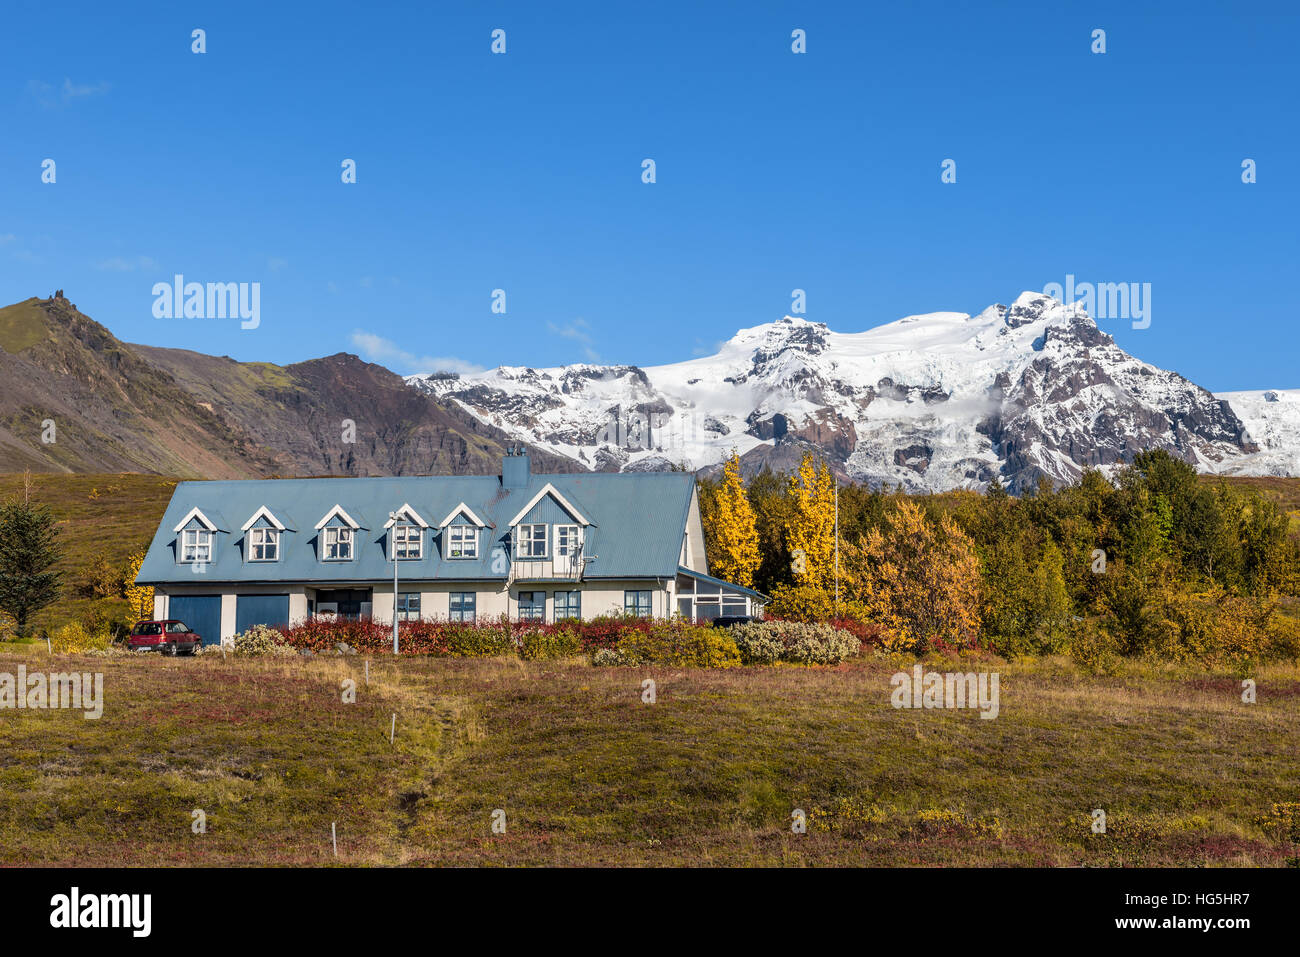 Landscape with an icelandic home and snowy mountains in the background. Stock Photo